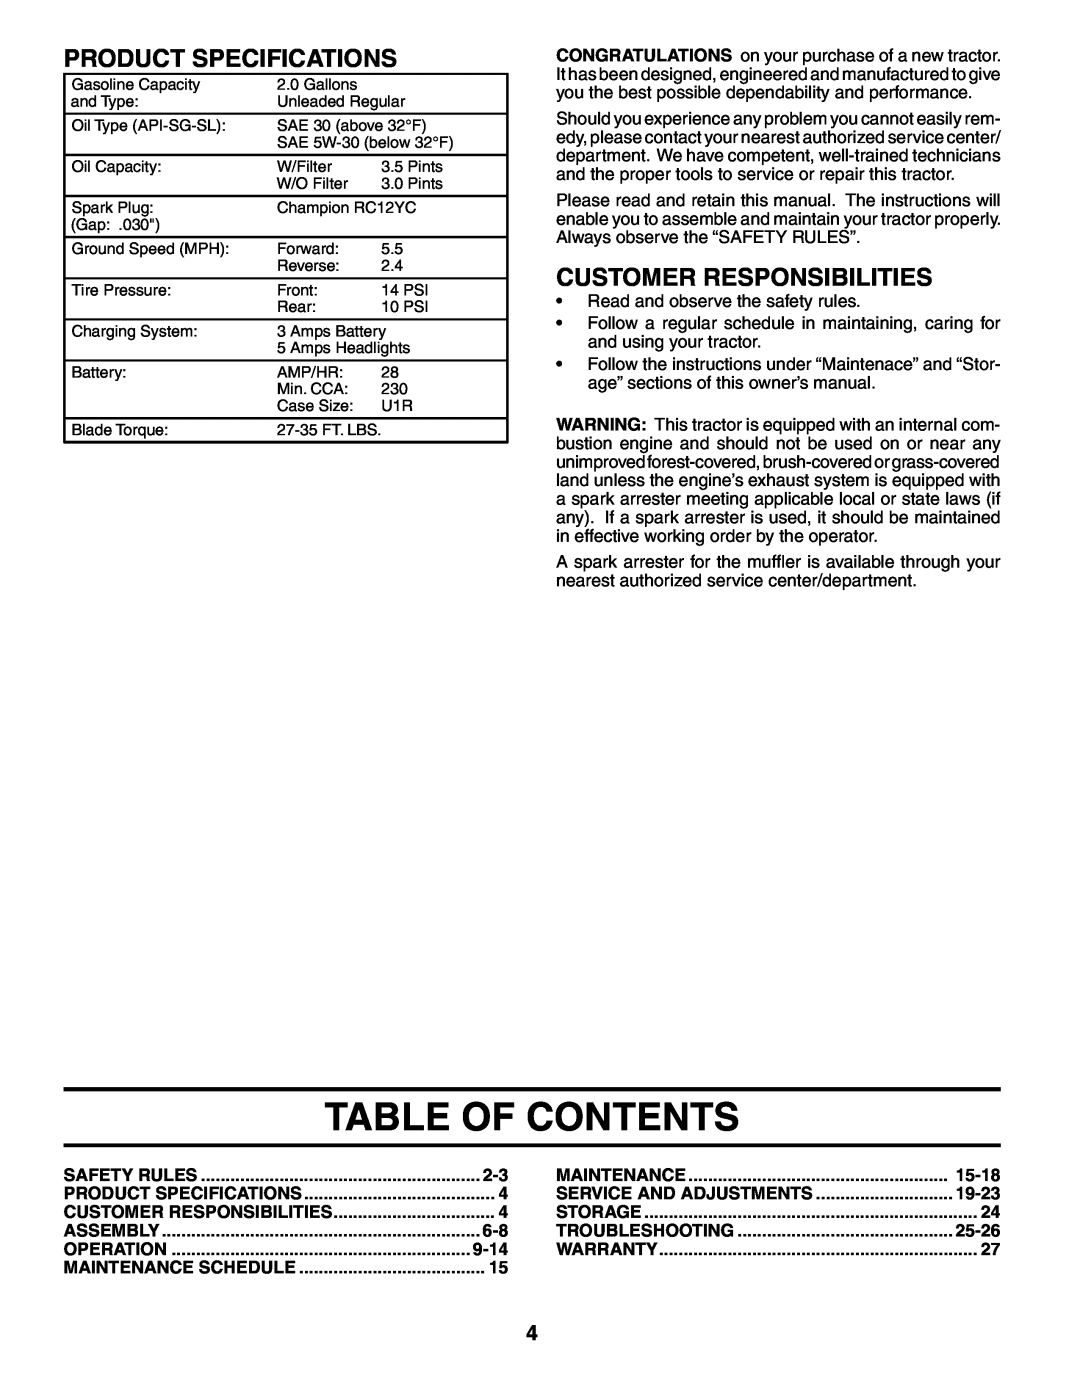 Poulan BB185H42YT manual Table Of Contents, Product Specifications, Customer Responsibilities, 9-14, 15-18, 19-23, 25-26 